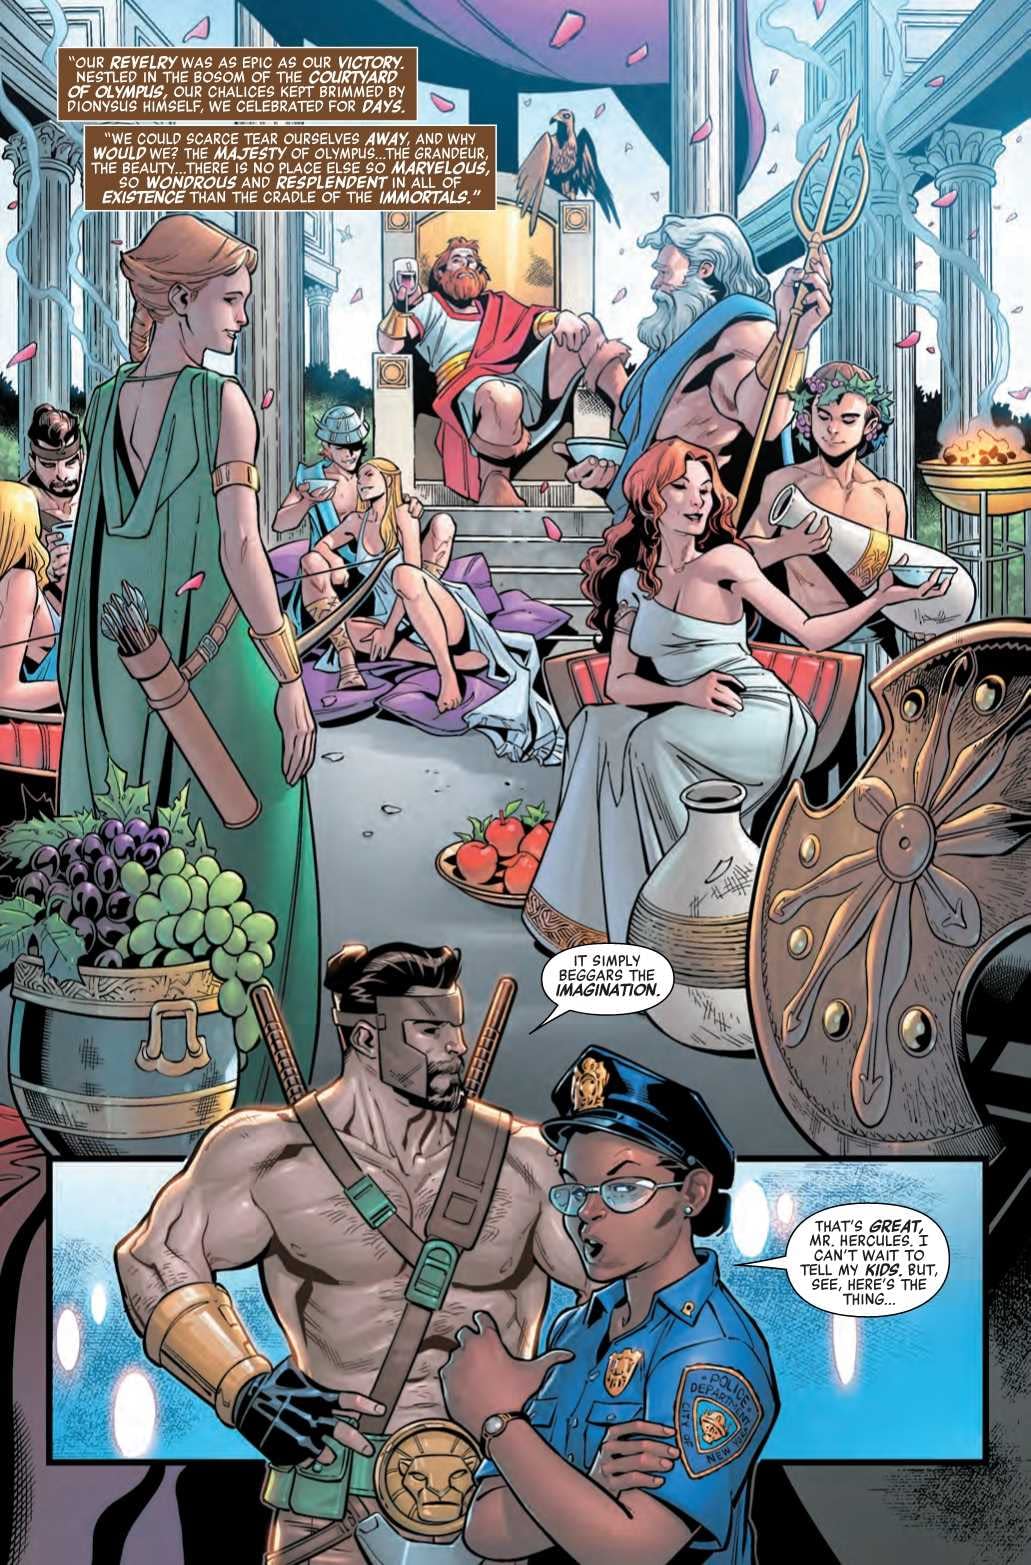 For Hercules, Does Pride Goeth Before a Fall in Next Week's Avengers No Road Home #1?